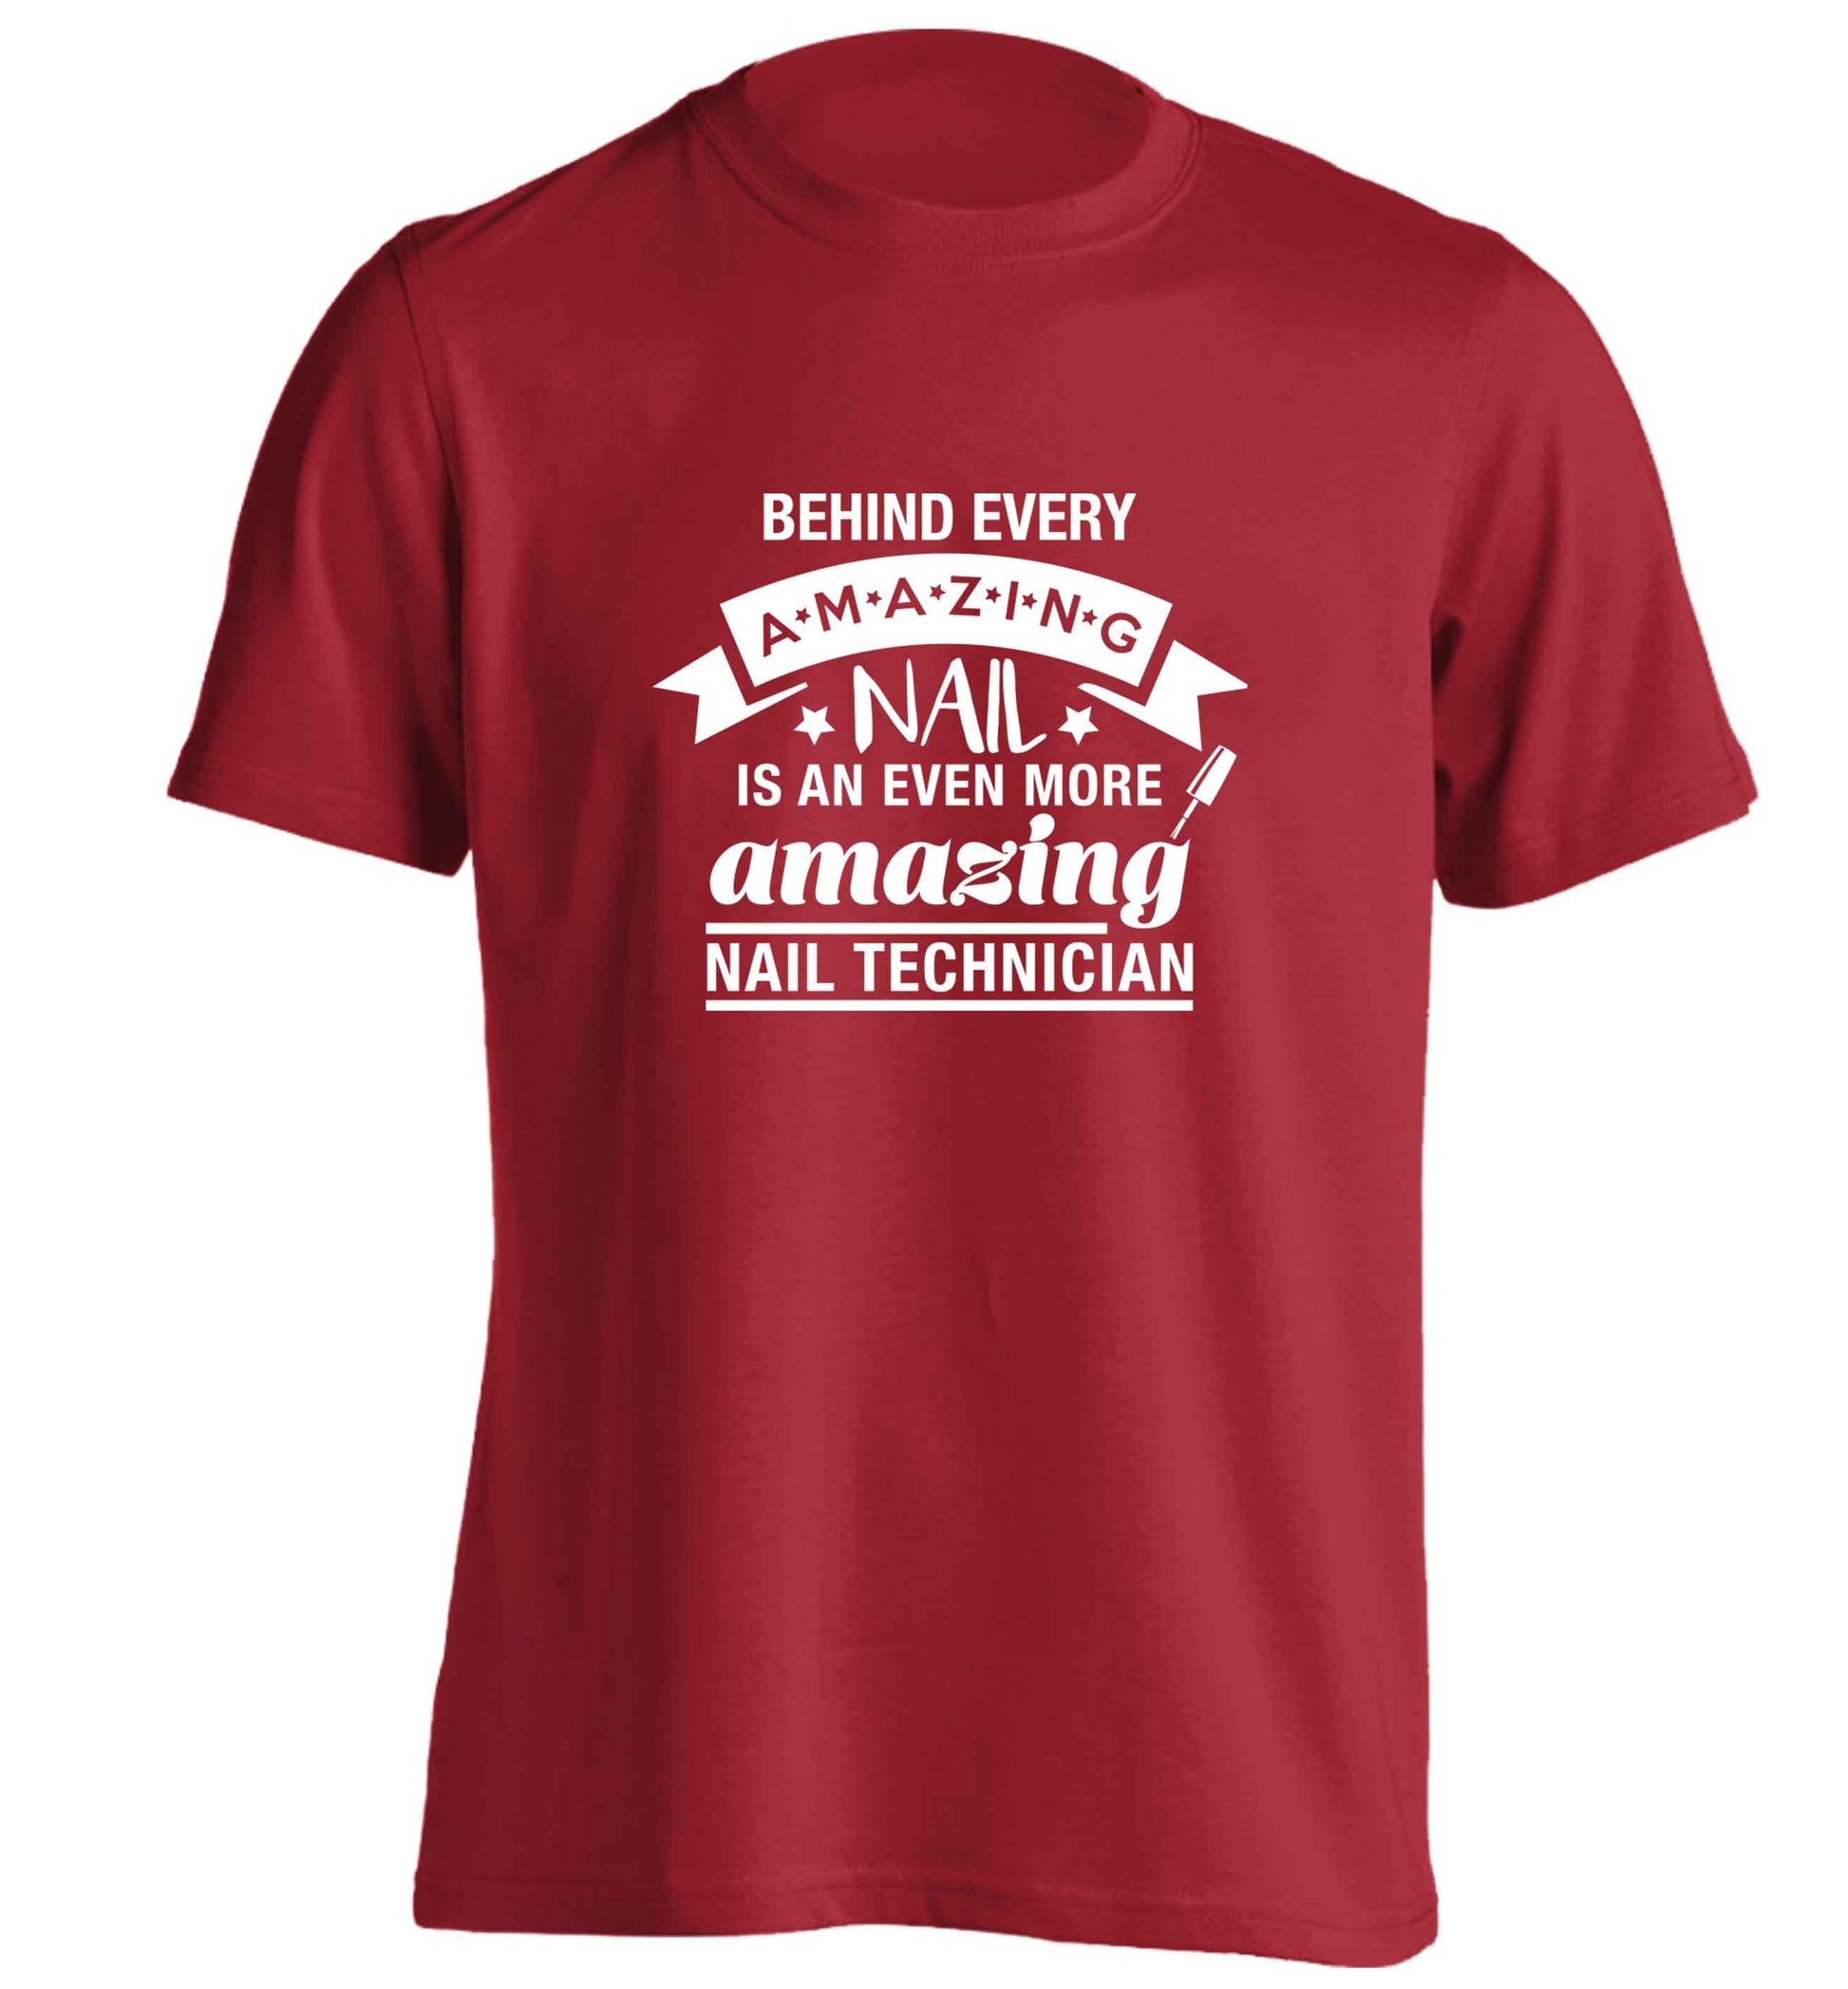 Behind every amazing nail is an even more amazing nail technician adults unisex red Tshirt 2XL